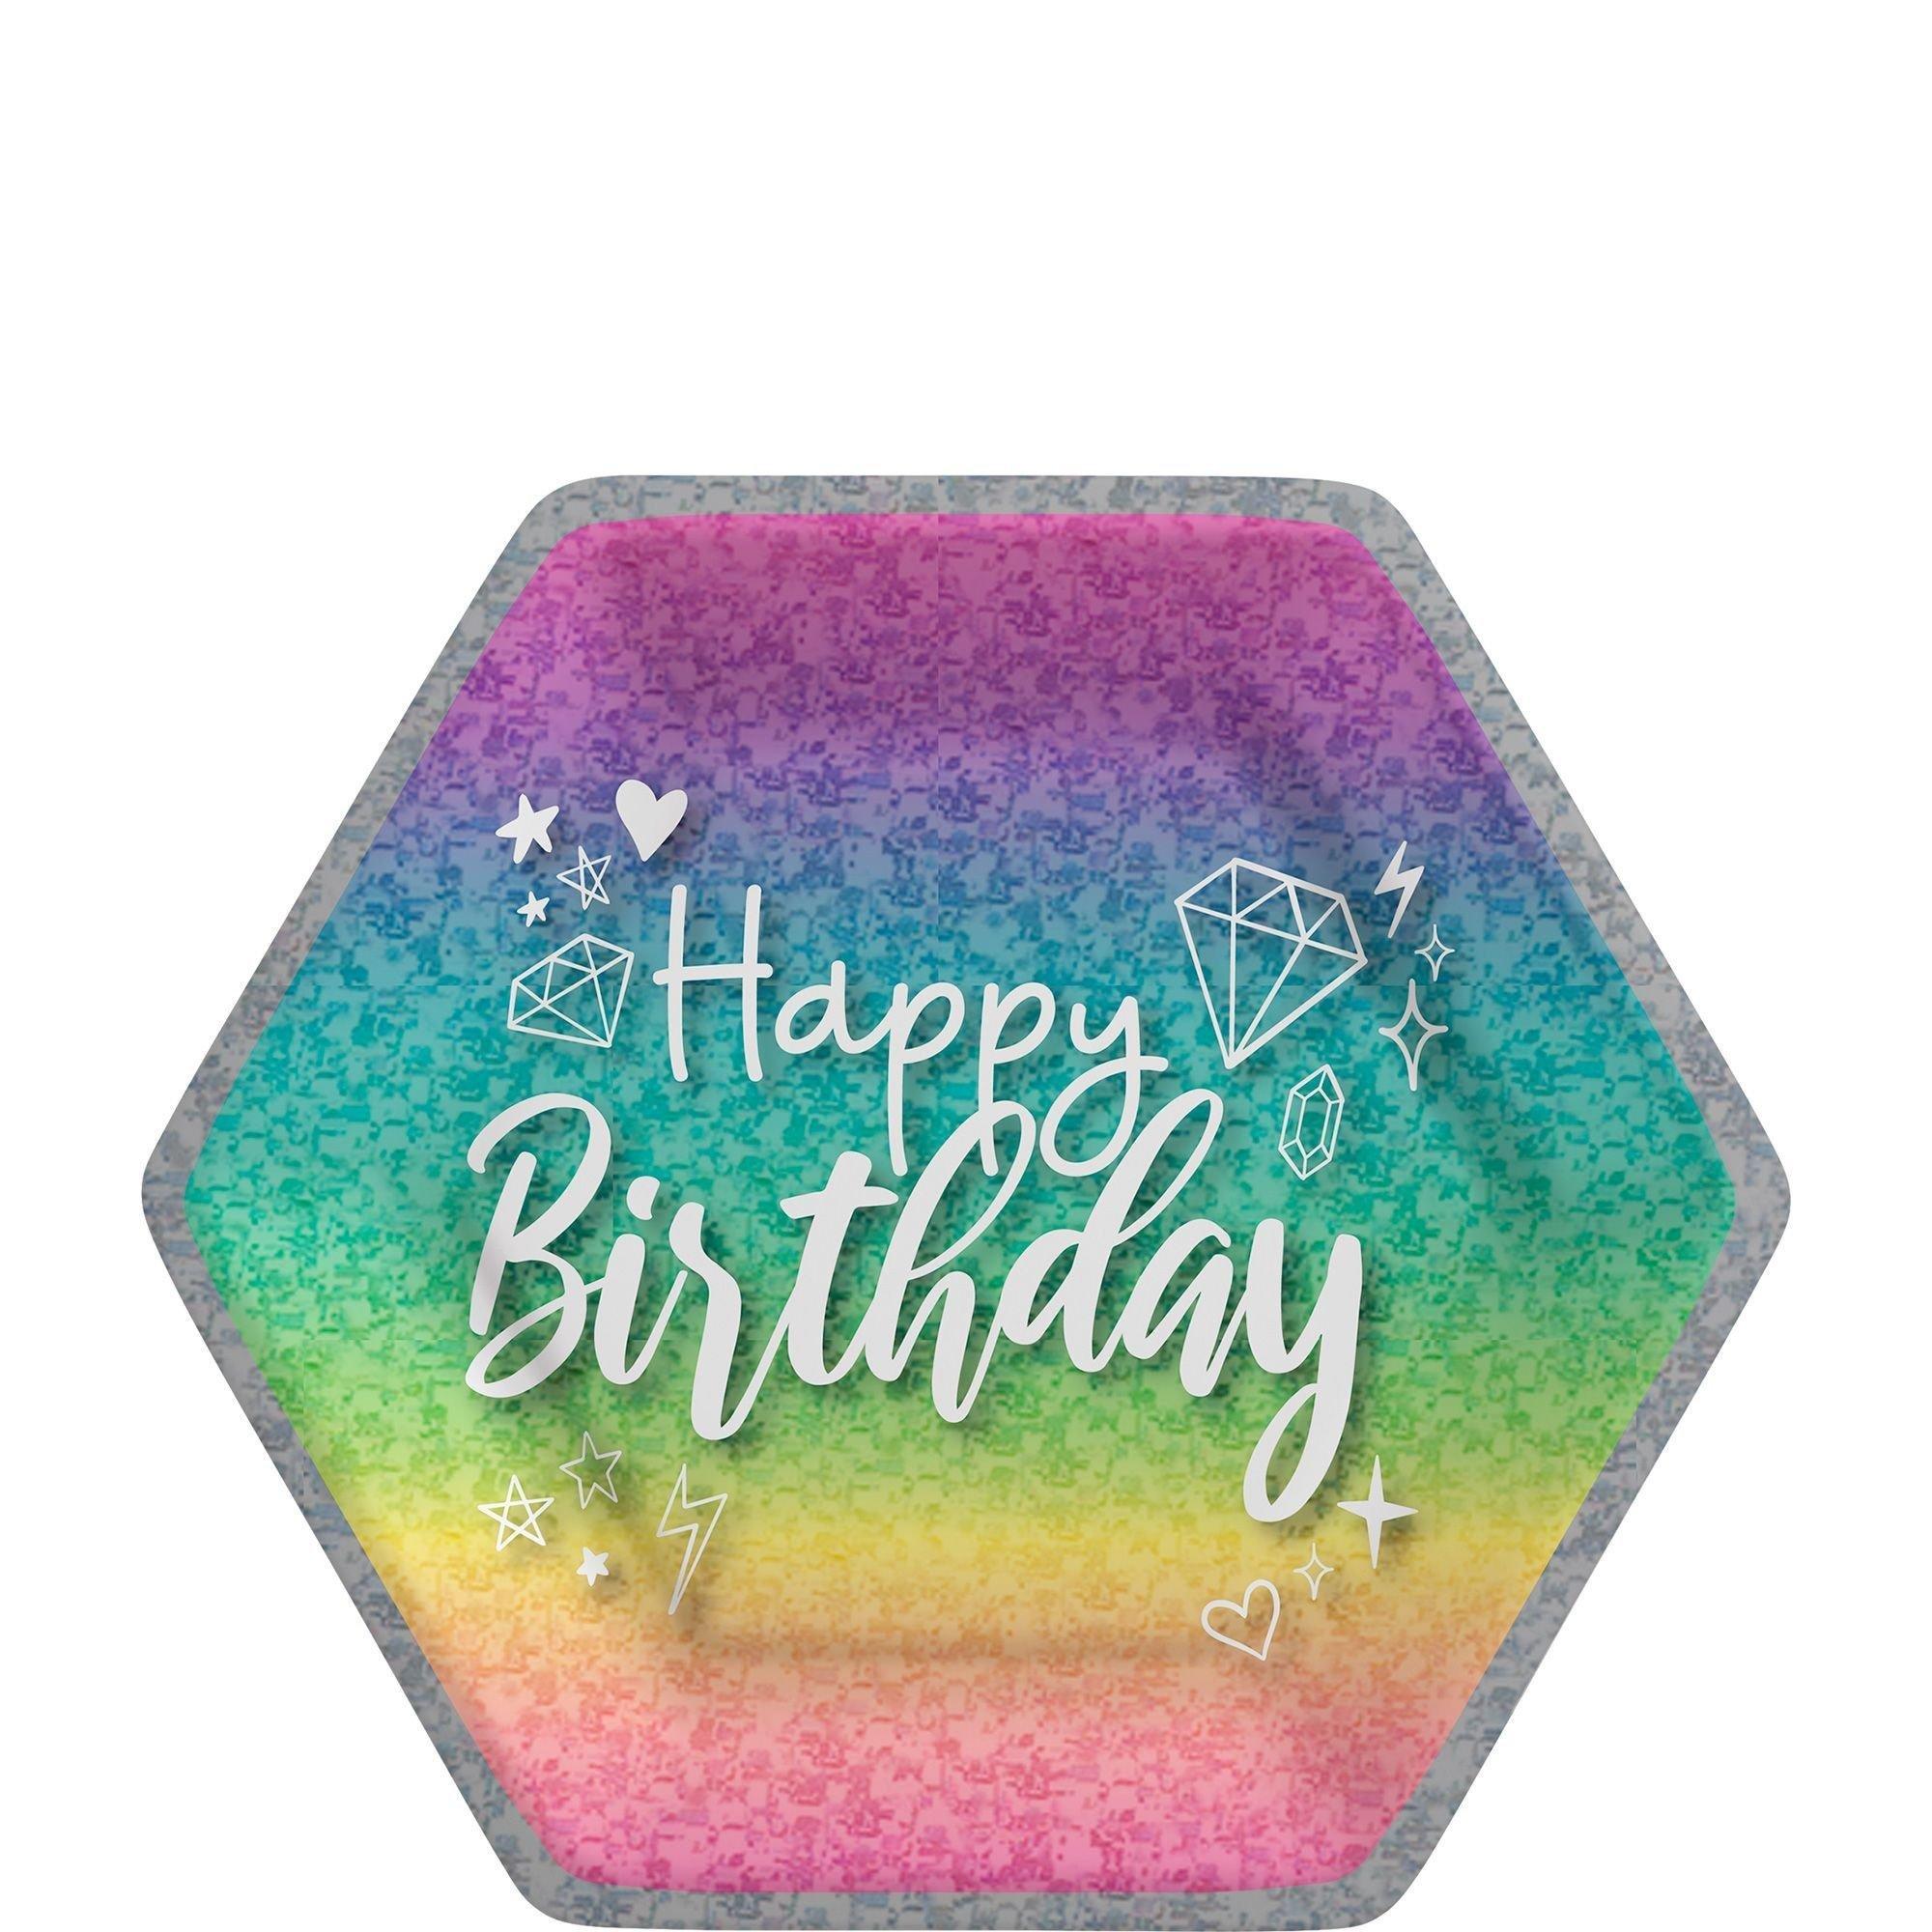 Party City Bluey Tableware Kit for 16 Guests Birthday Party Supplies | Birthday